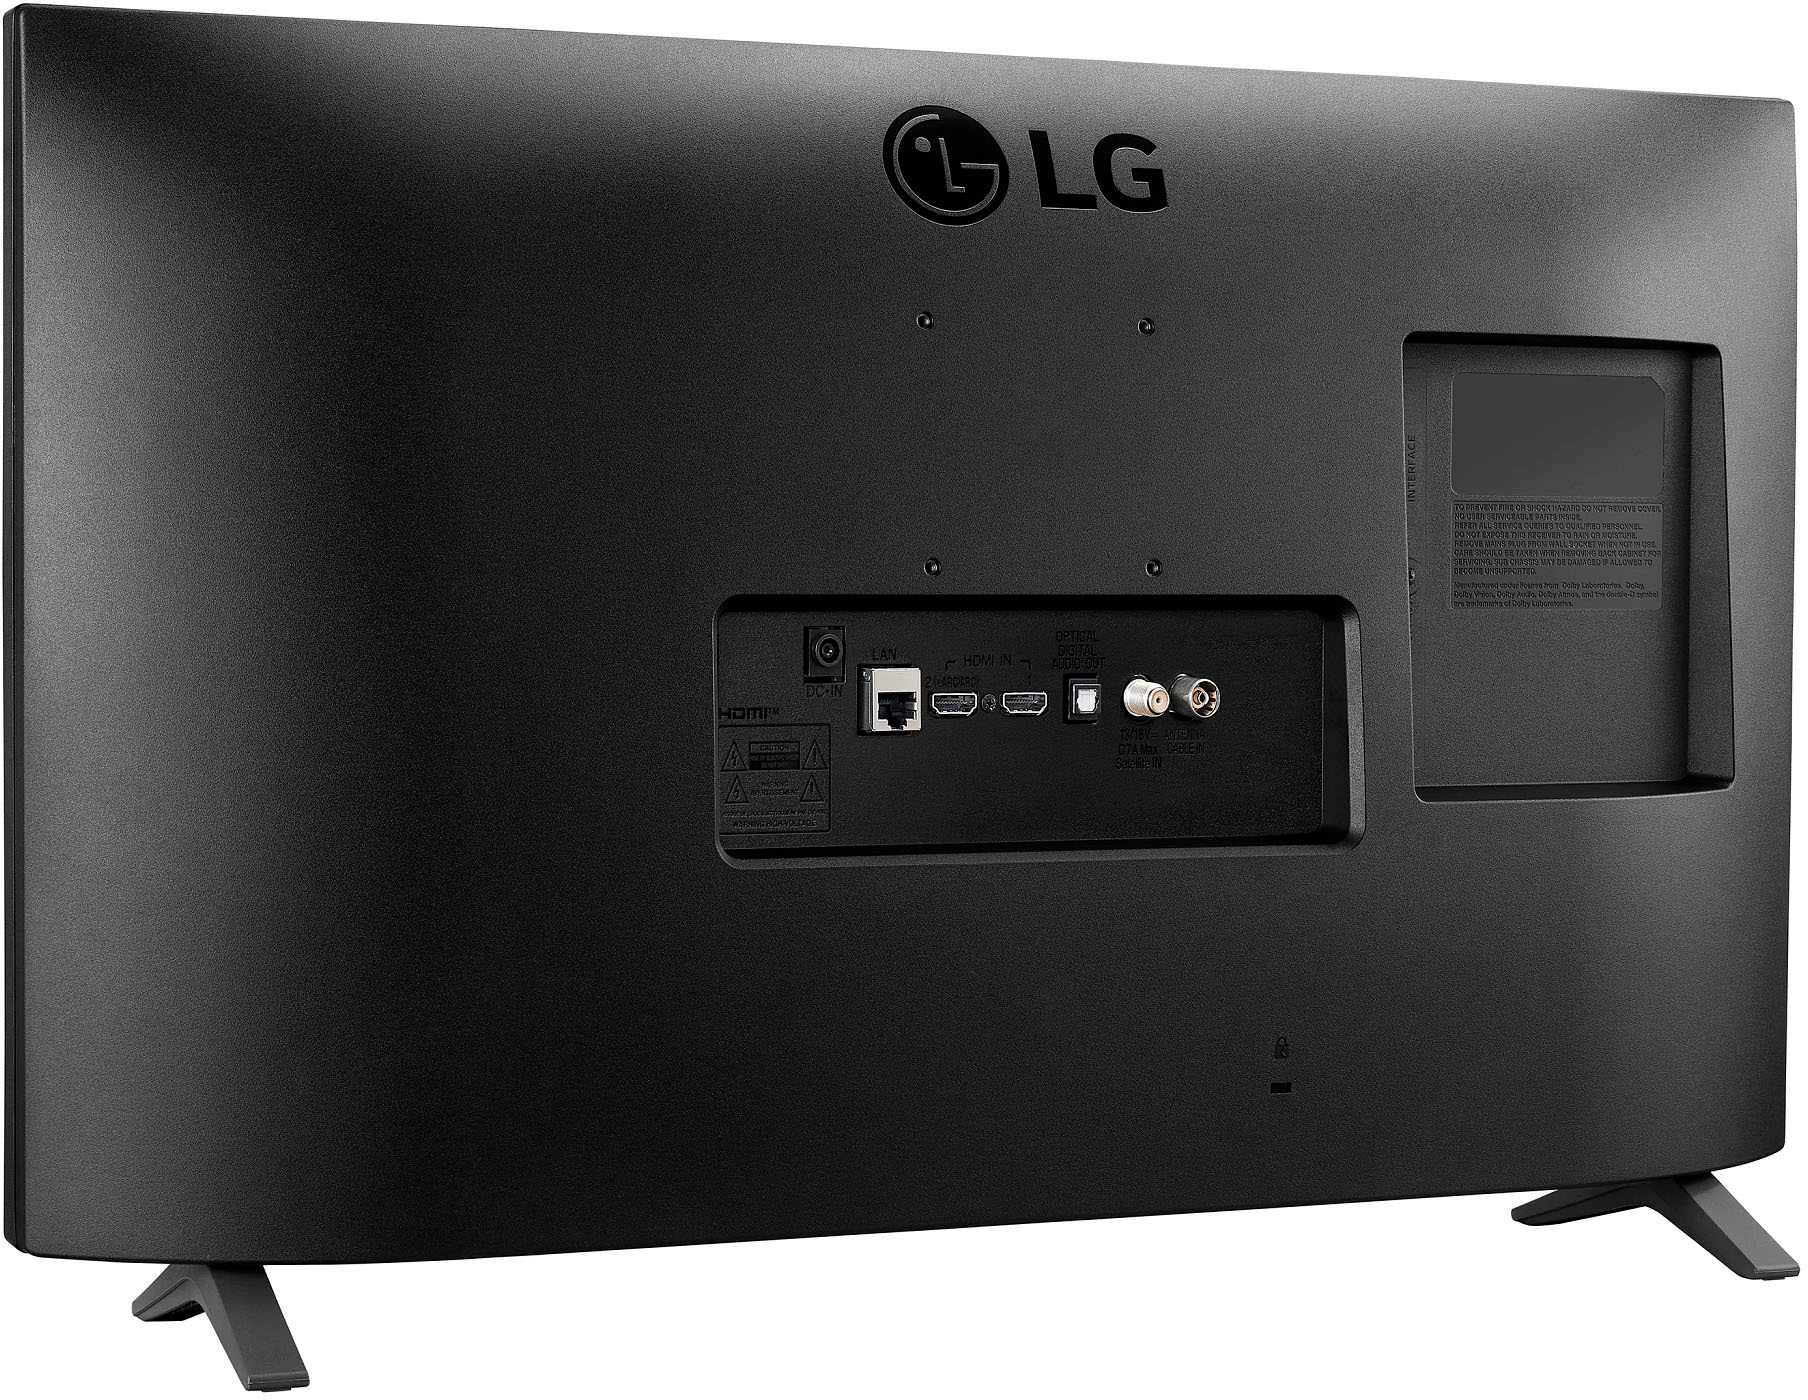 LG - 27 Class LED Full HD Smart TV Monitor with WebOS